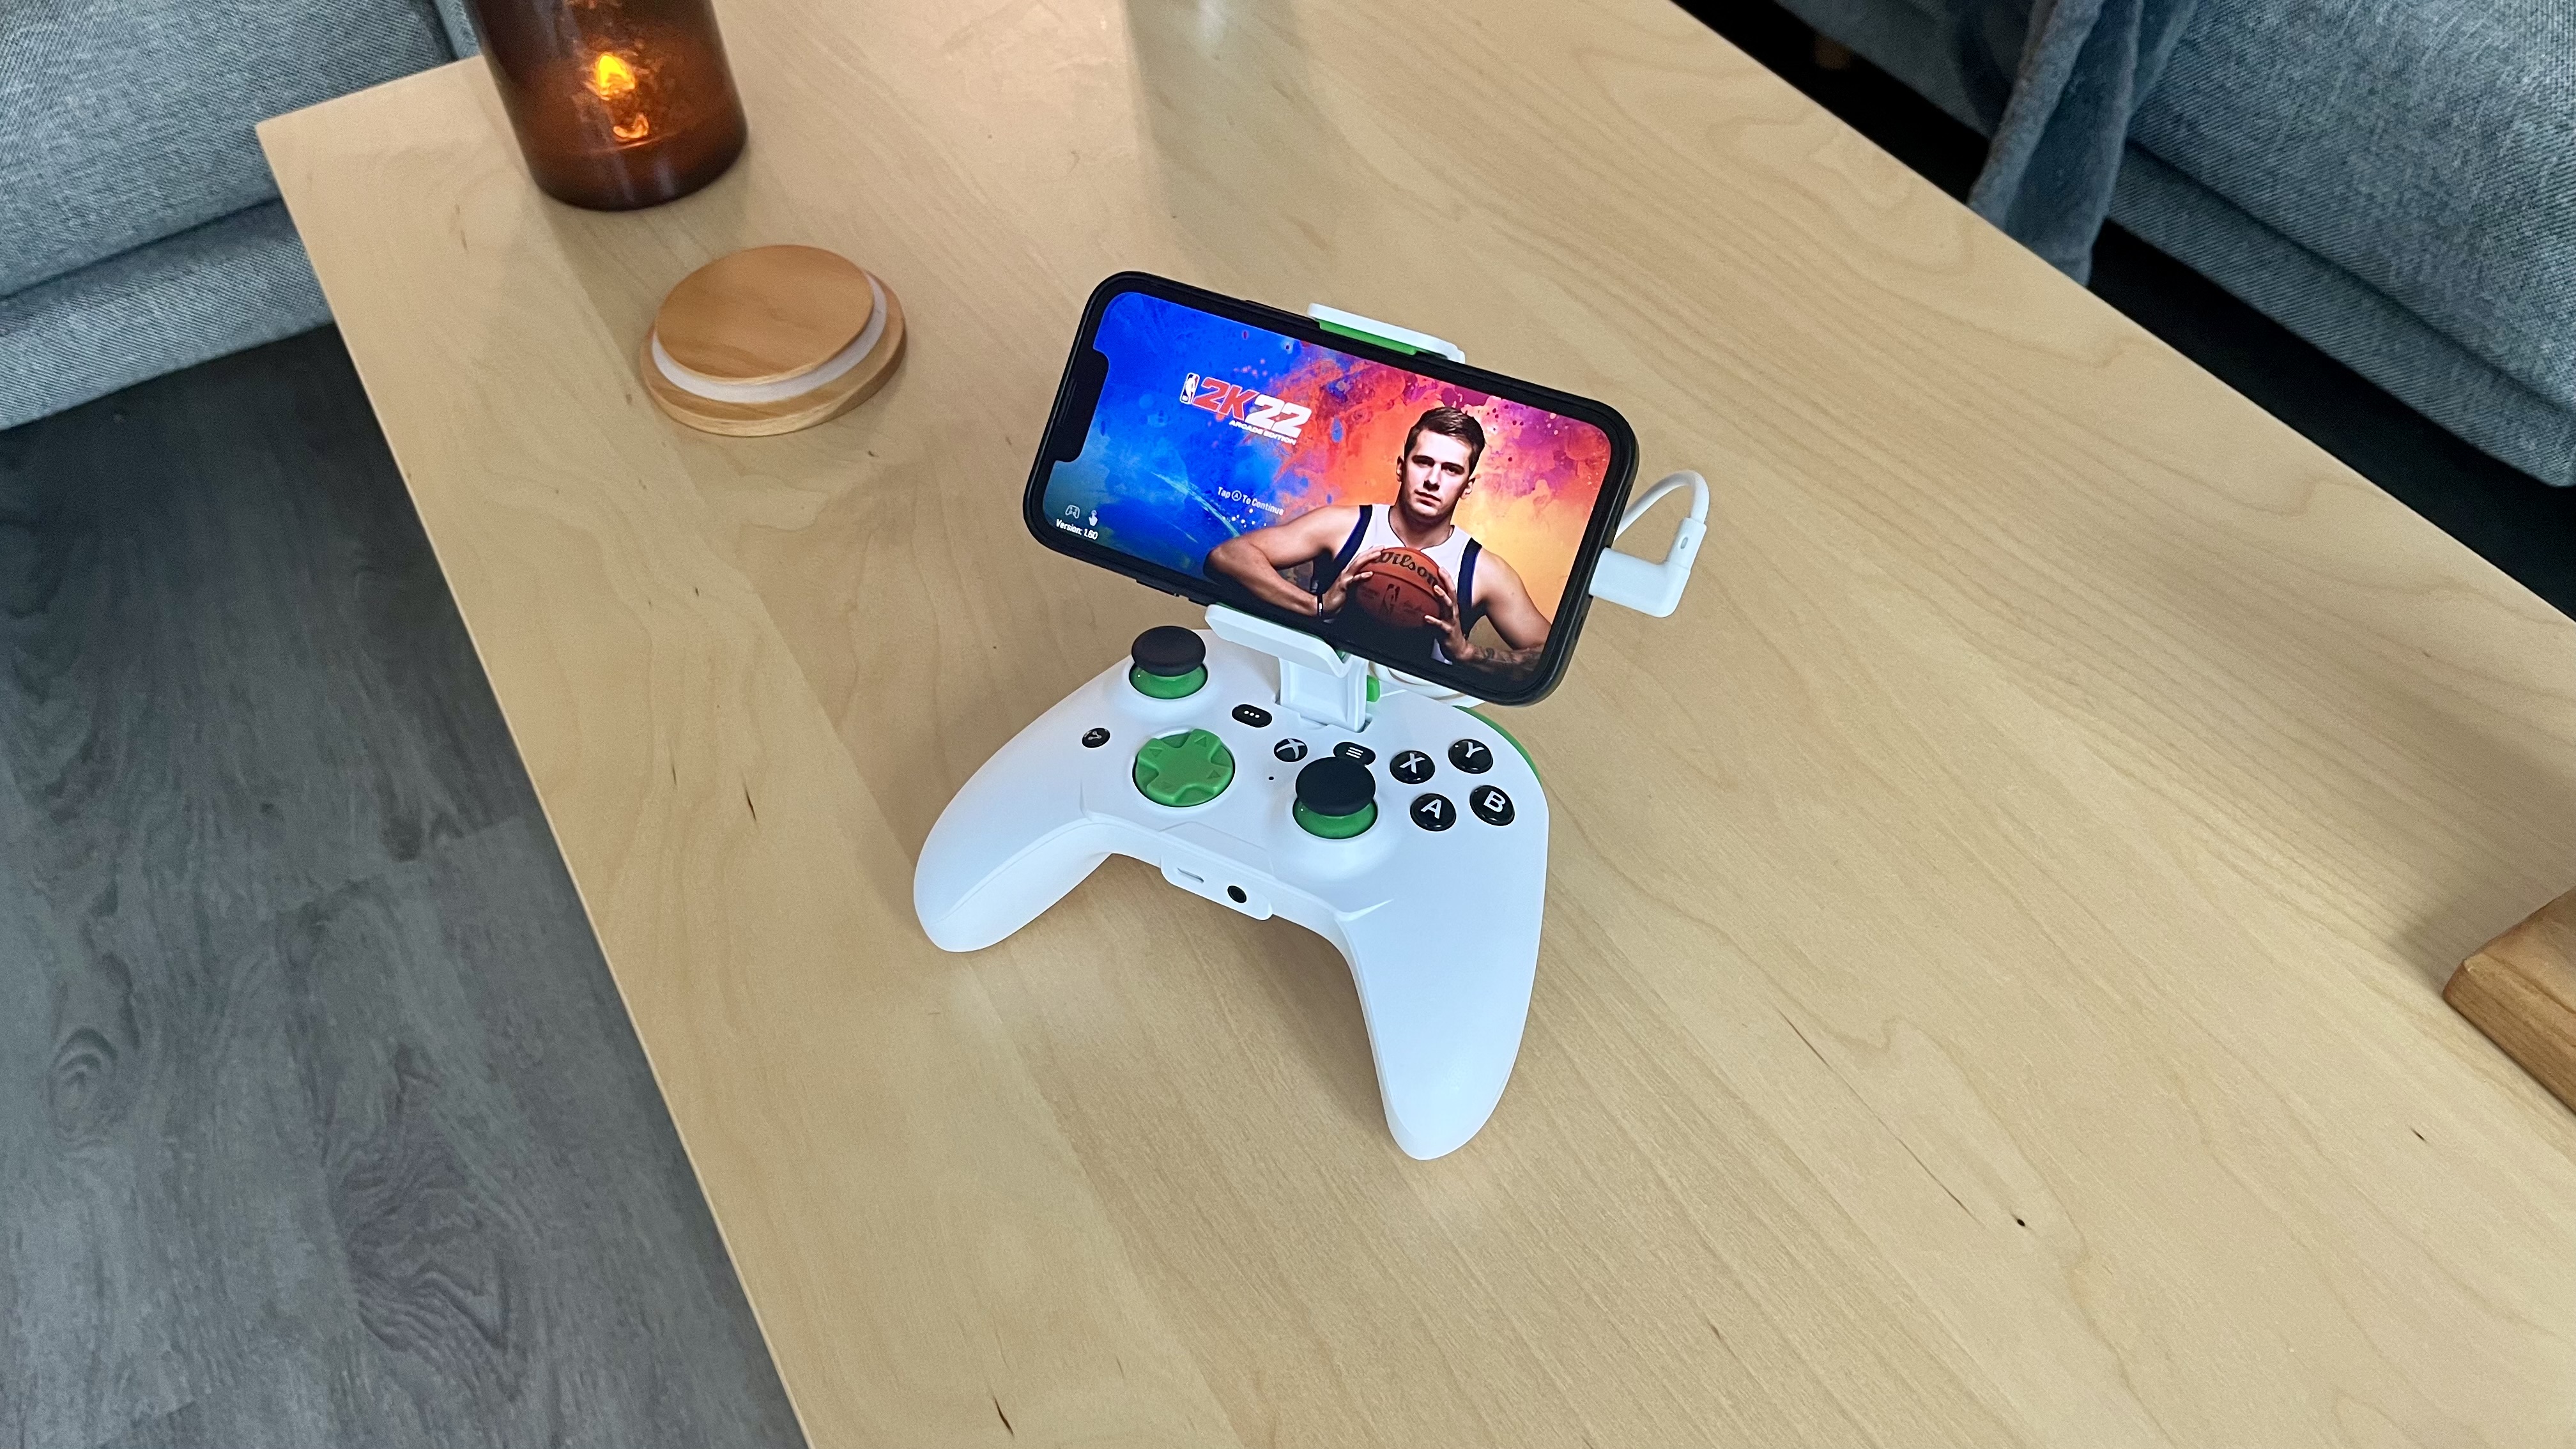 RiotPWR Xbox Cloud Gaming Controller for iPhone review: As close